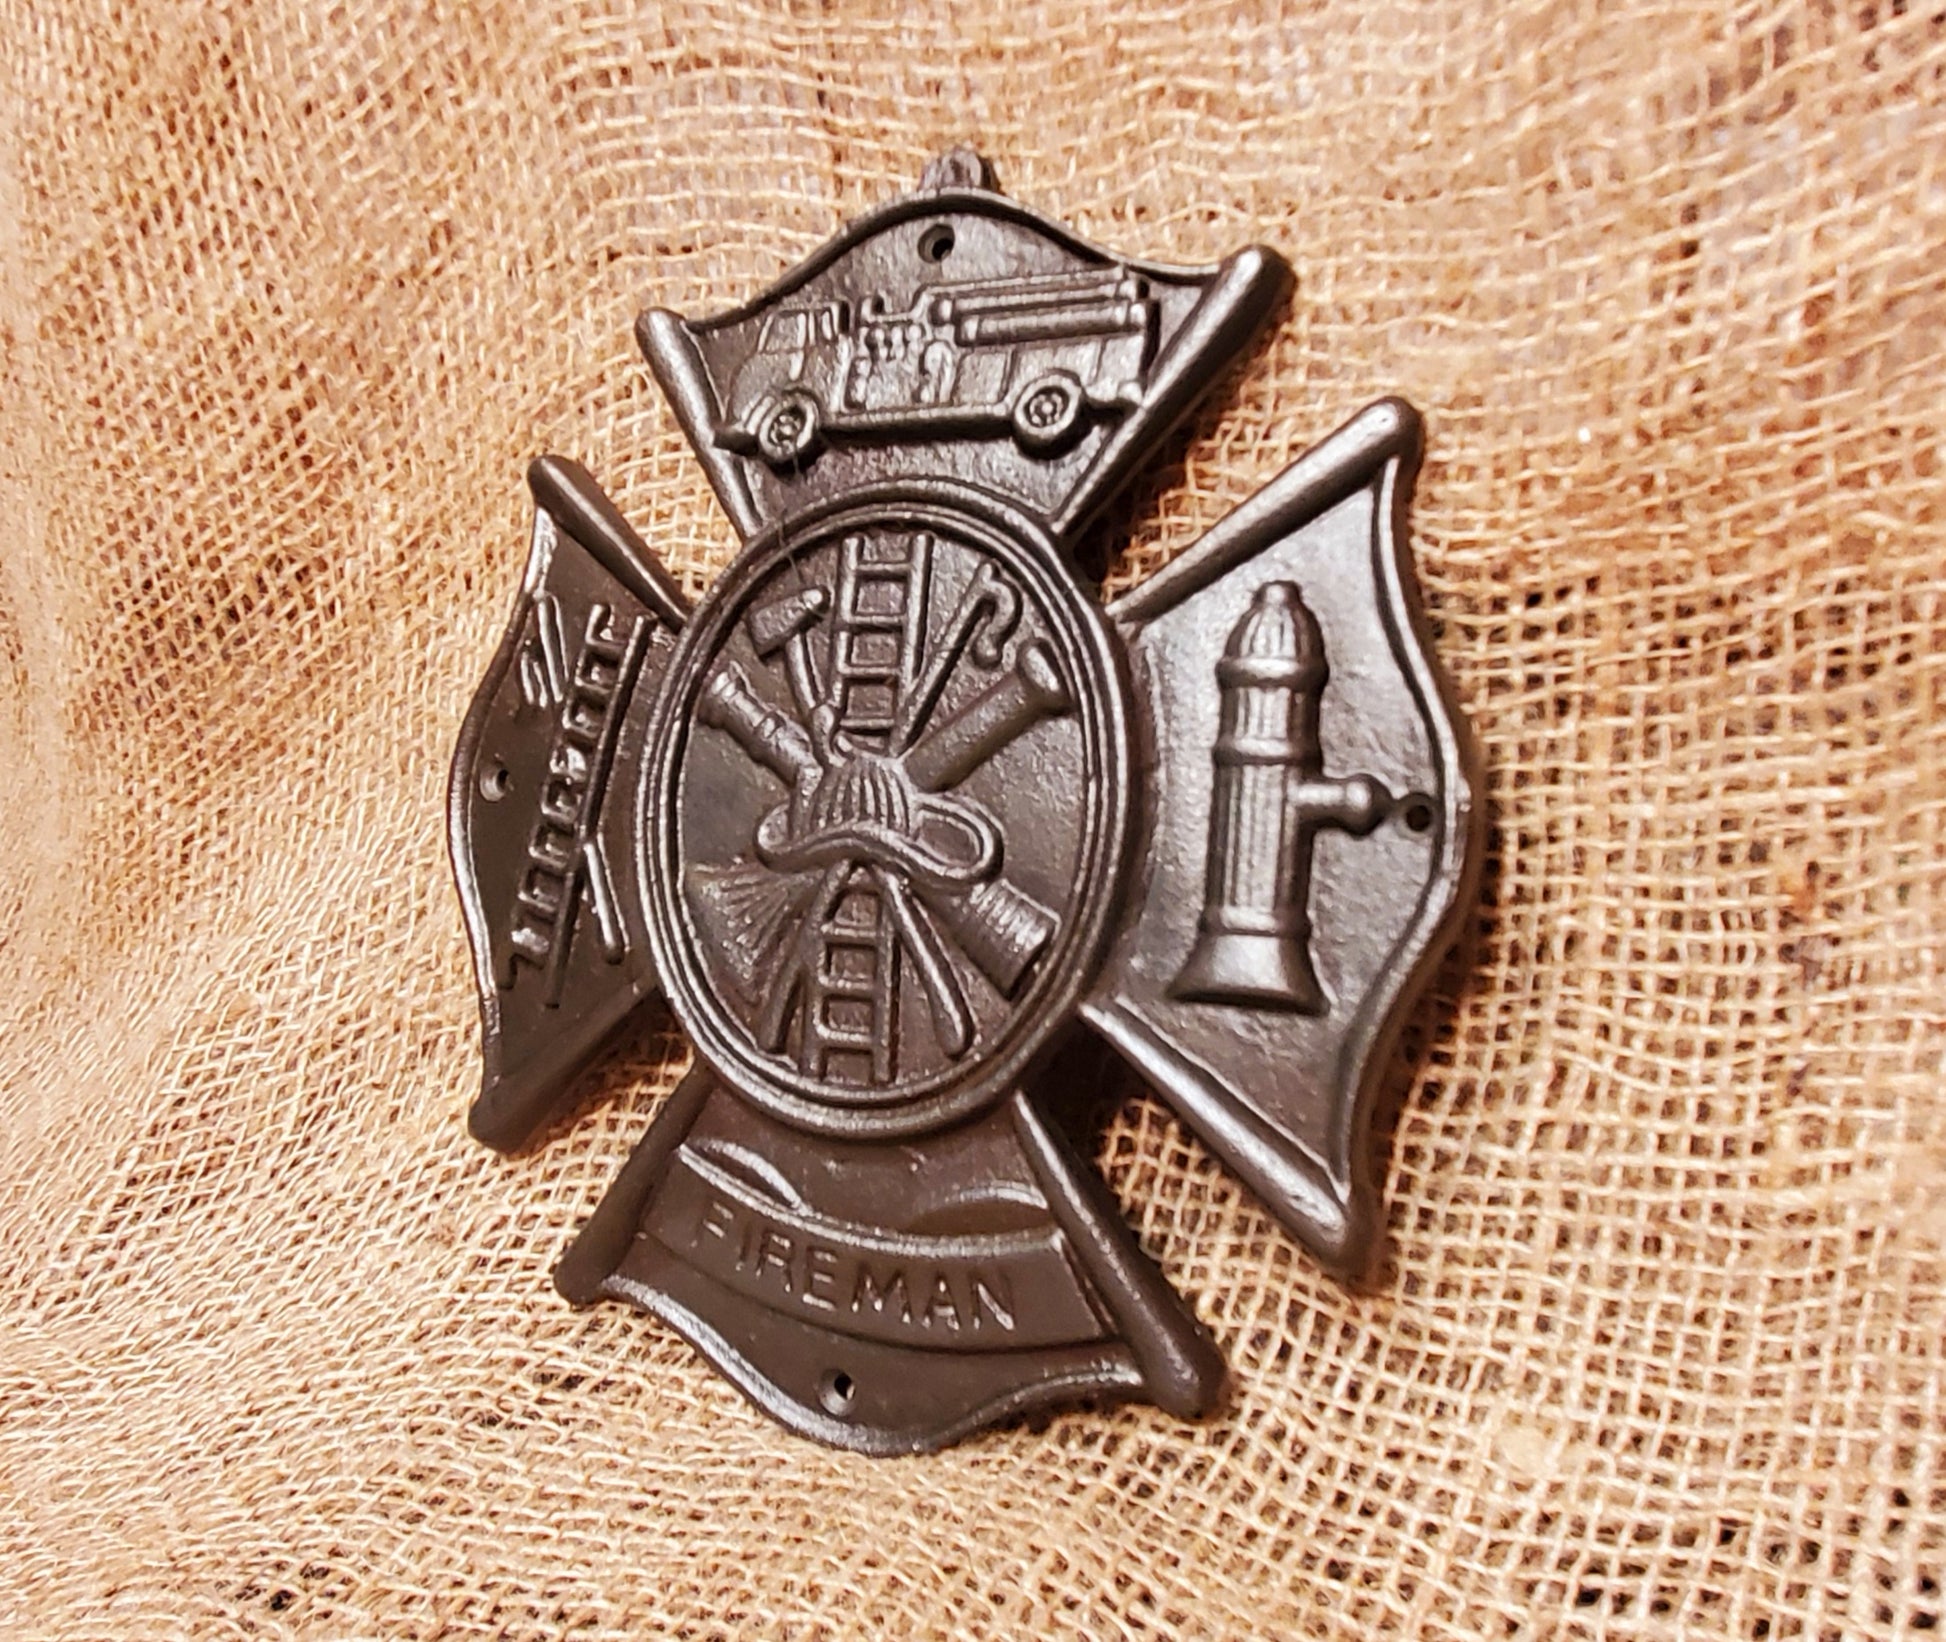 Fireman Emblem - Spearhead Collection - Plaques and Signs - Gift Ideas, Home Decor, Plaques and Signs